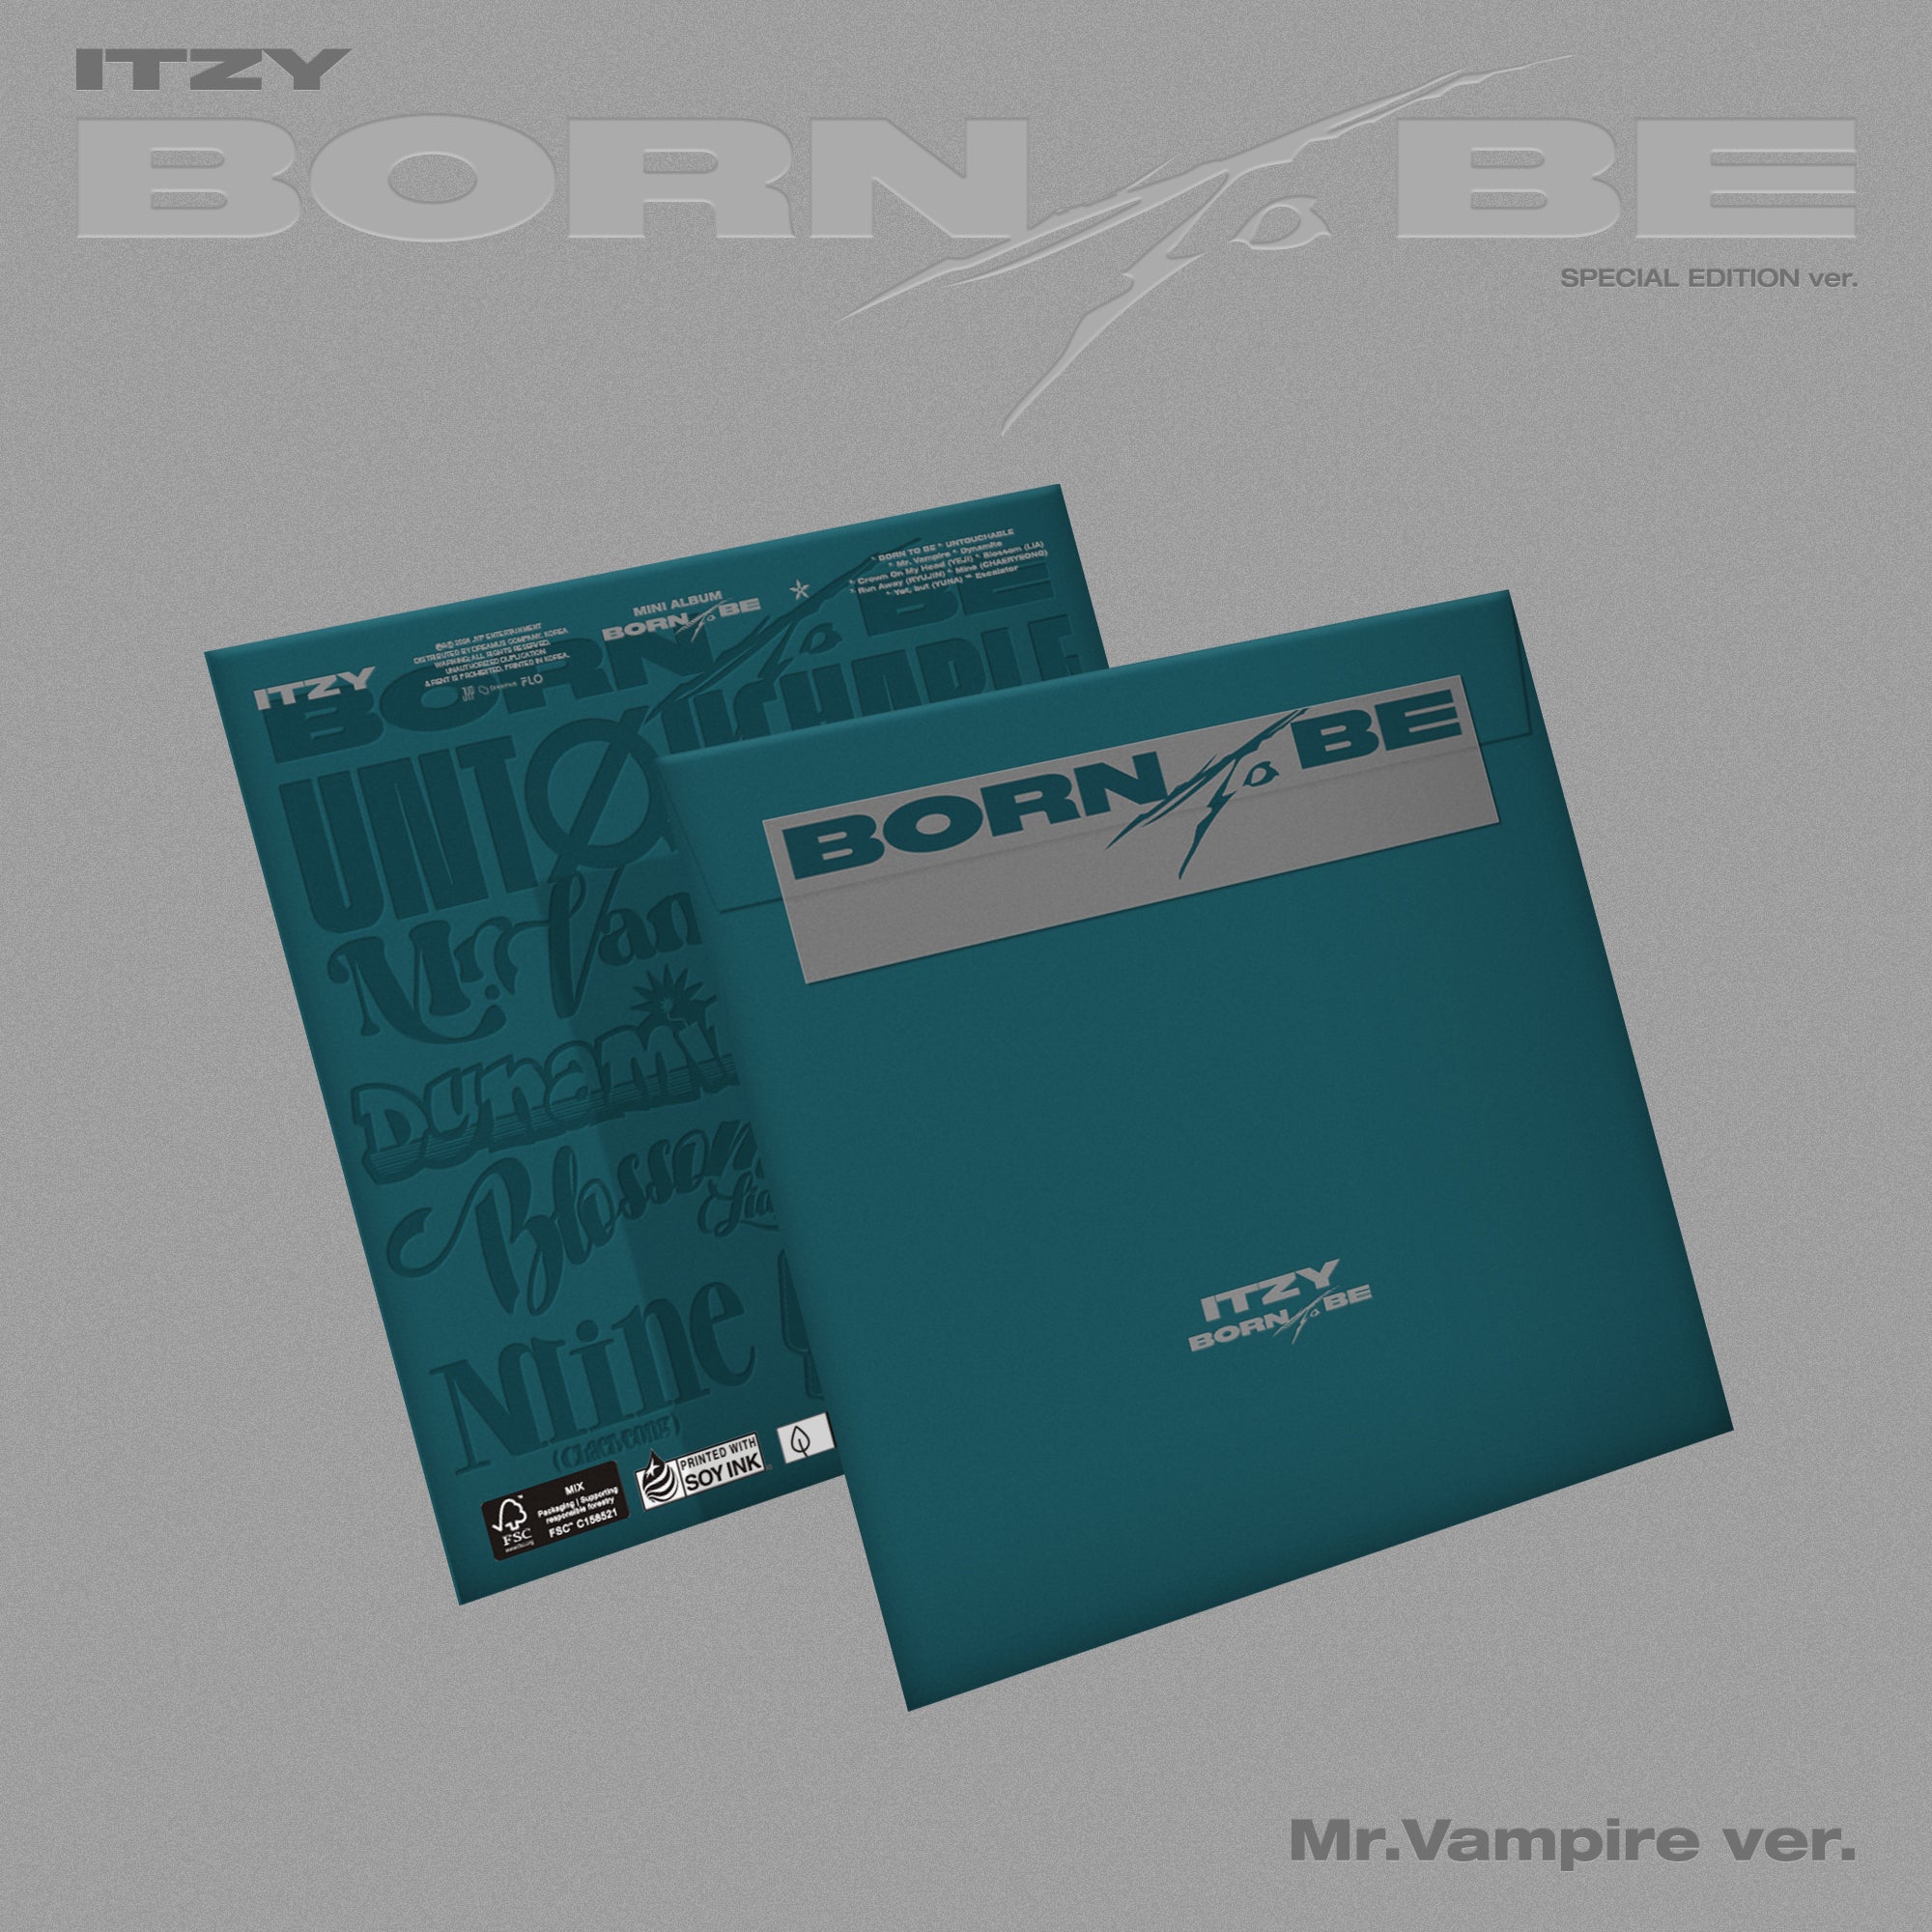 ITZY - BORN TO BE (SPECIAL EDITION / Mr. Vampire ver.) – Kpop Planet